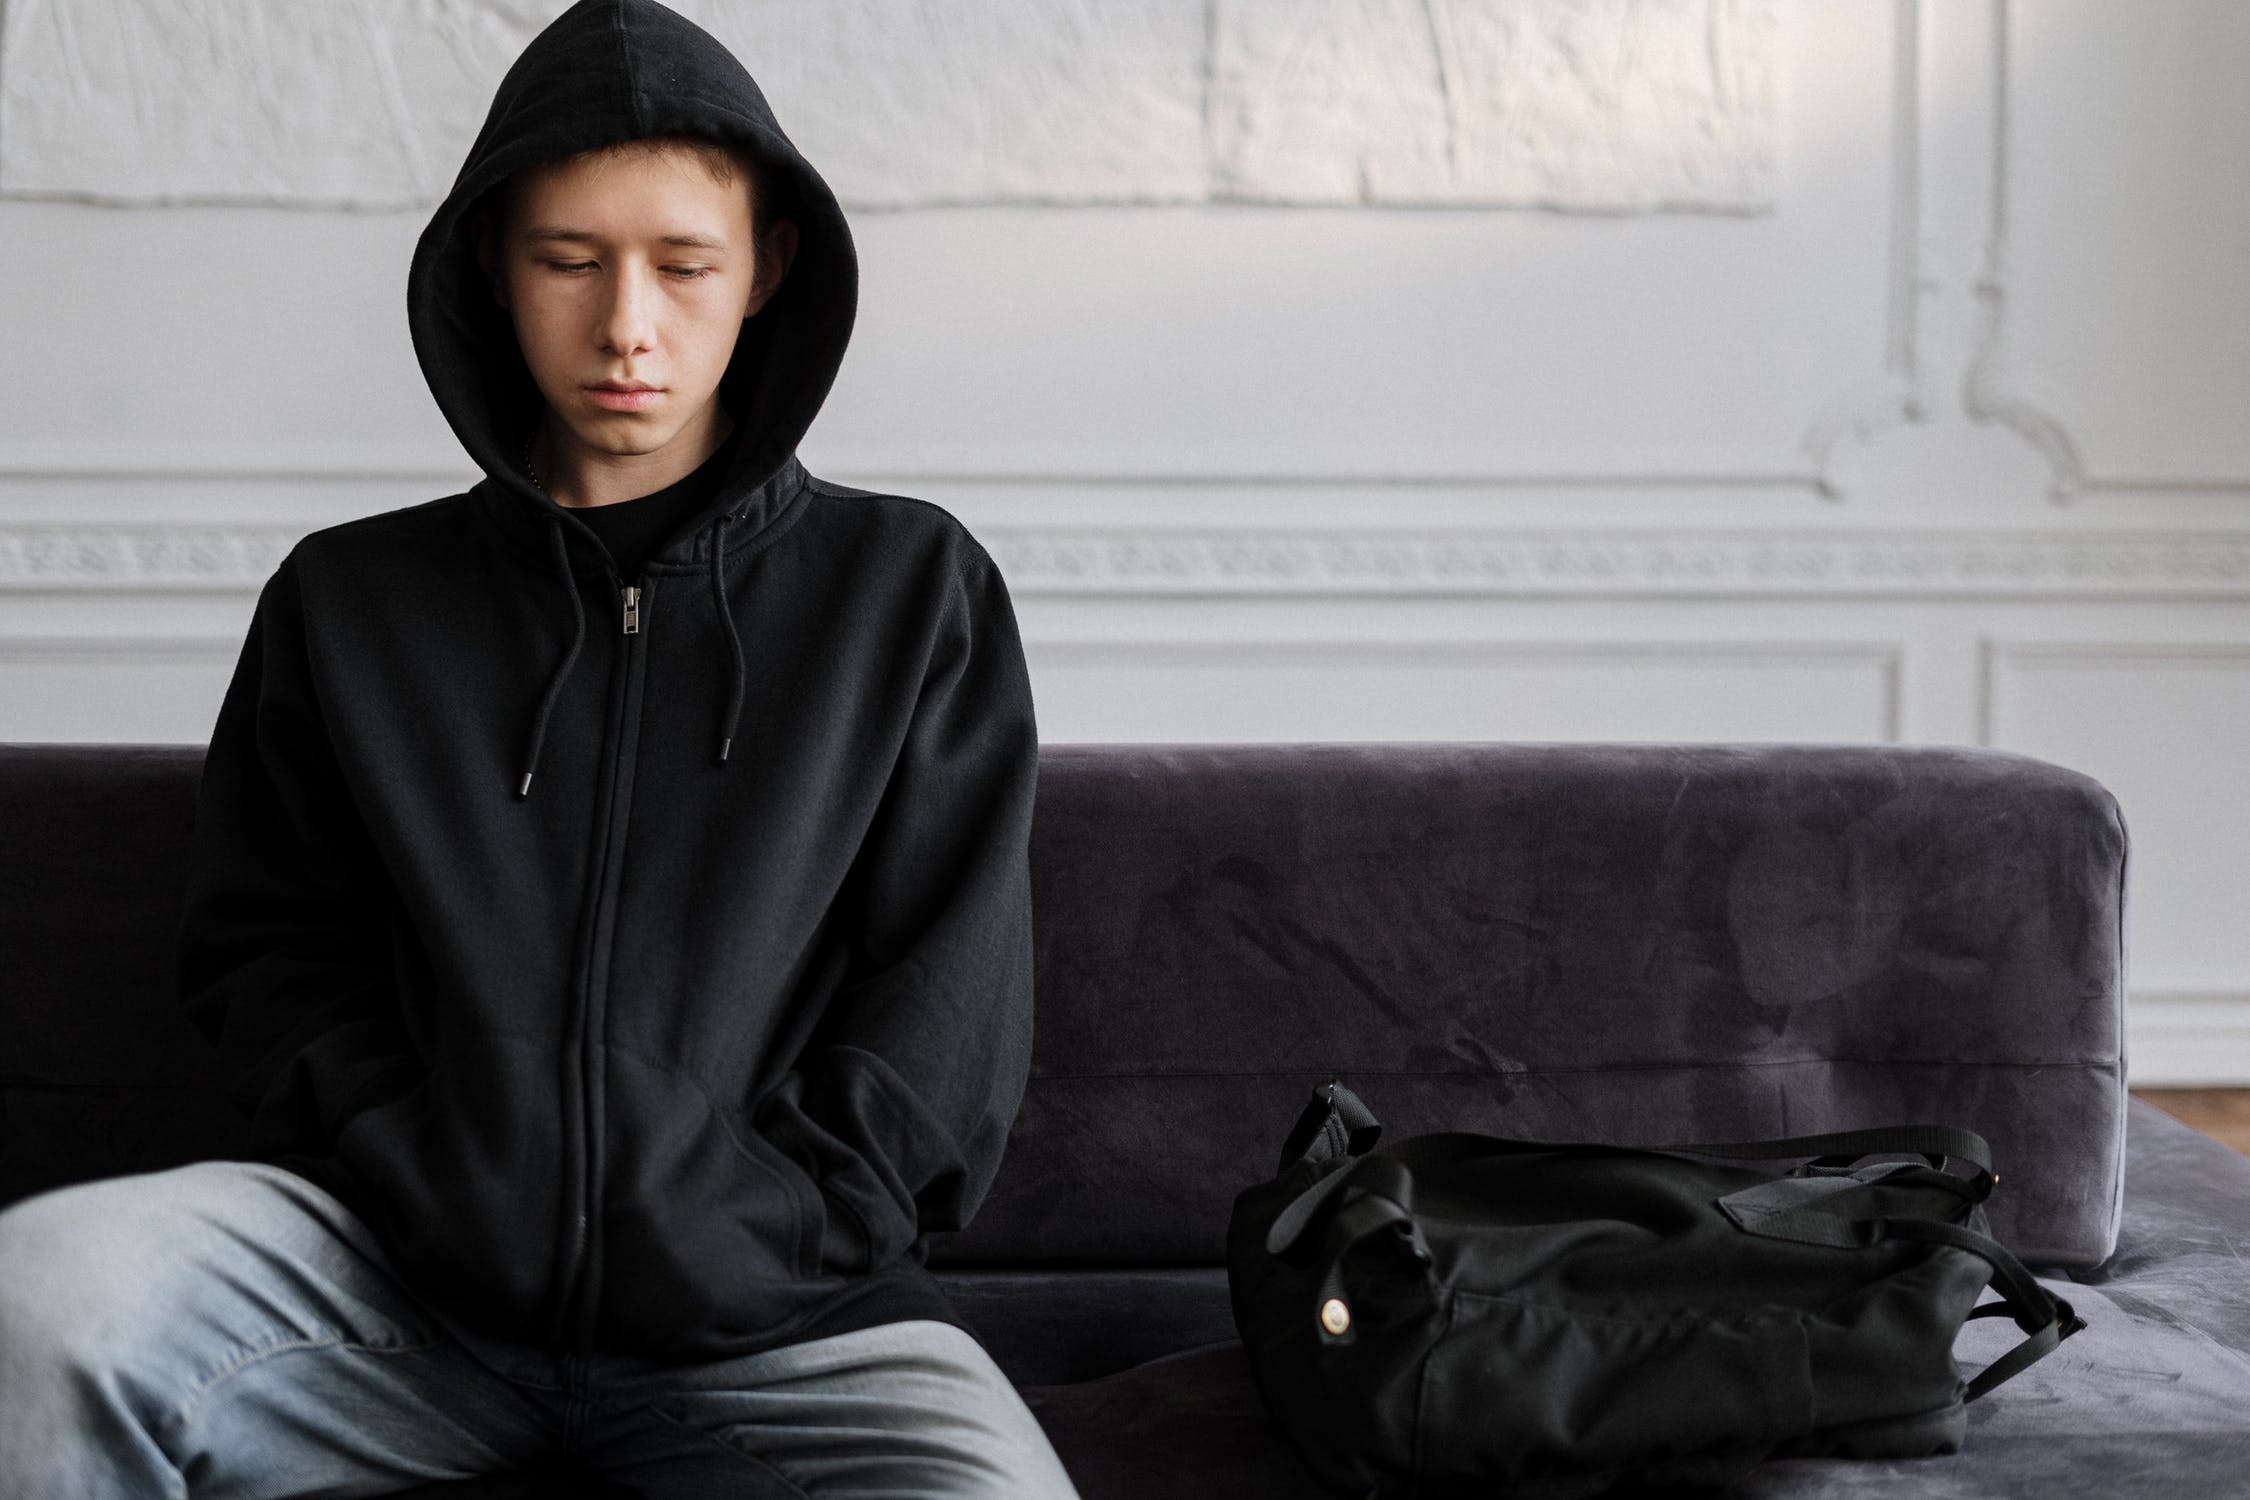 Sad-looking teenager sitting next to a purse | Source: Pexels